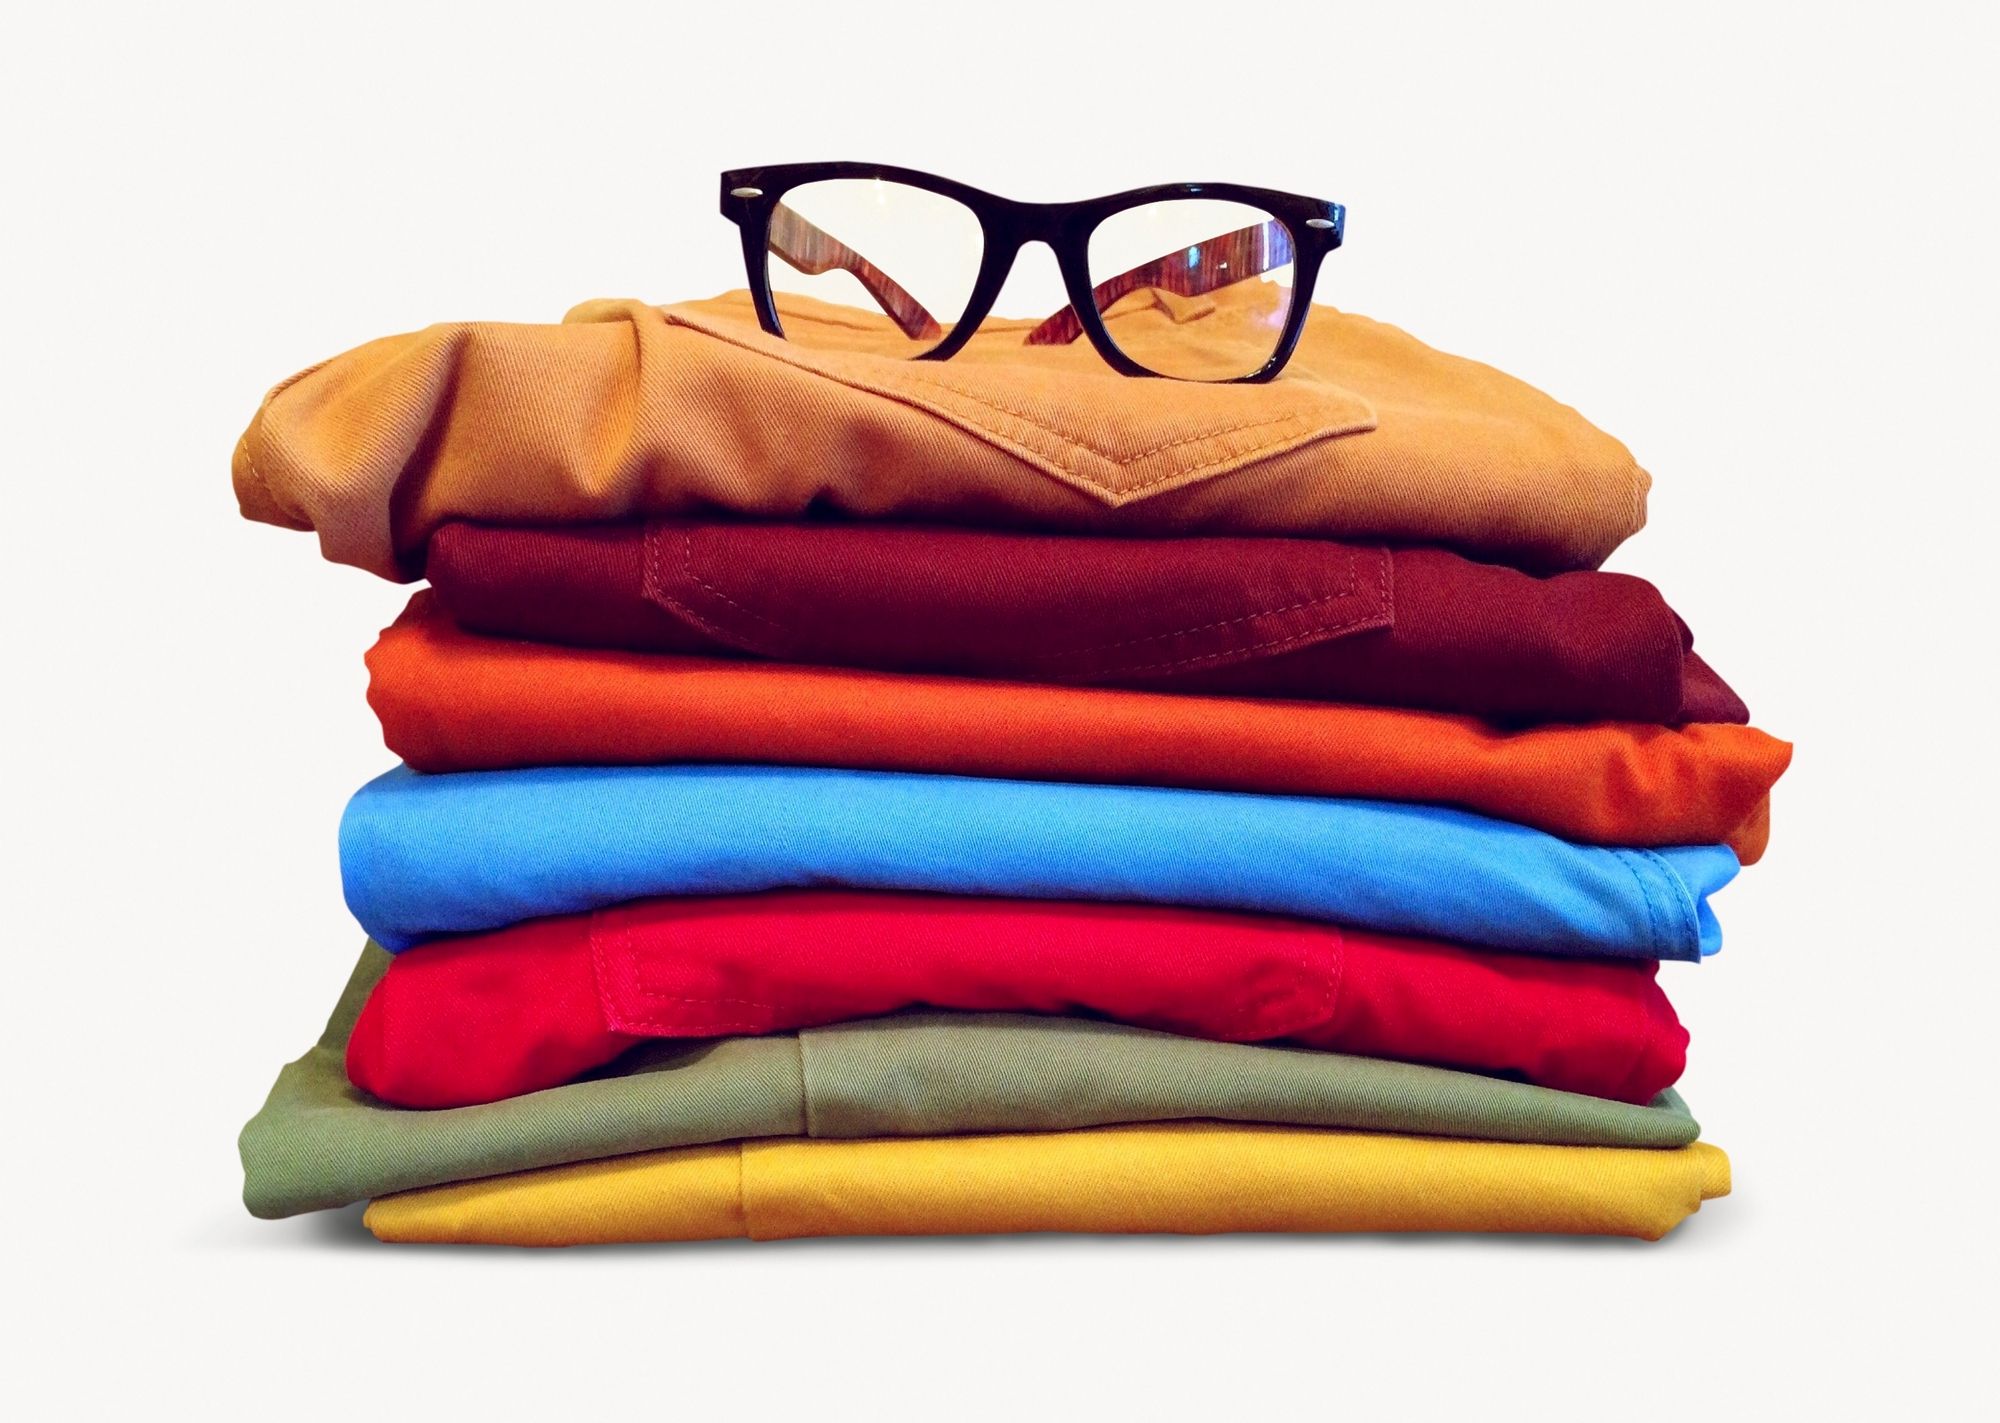 A pile of clothes with glasses on top